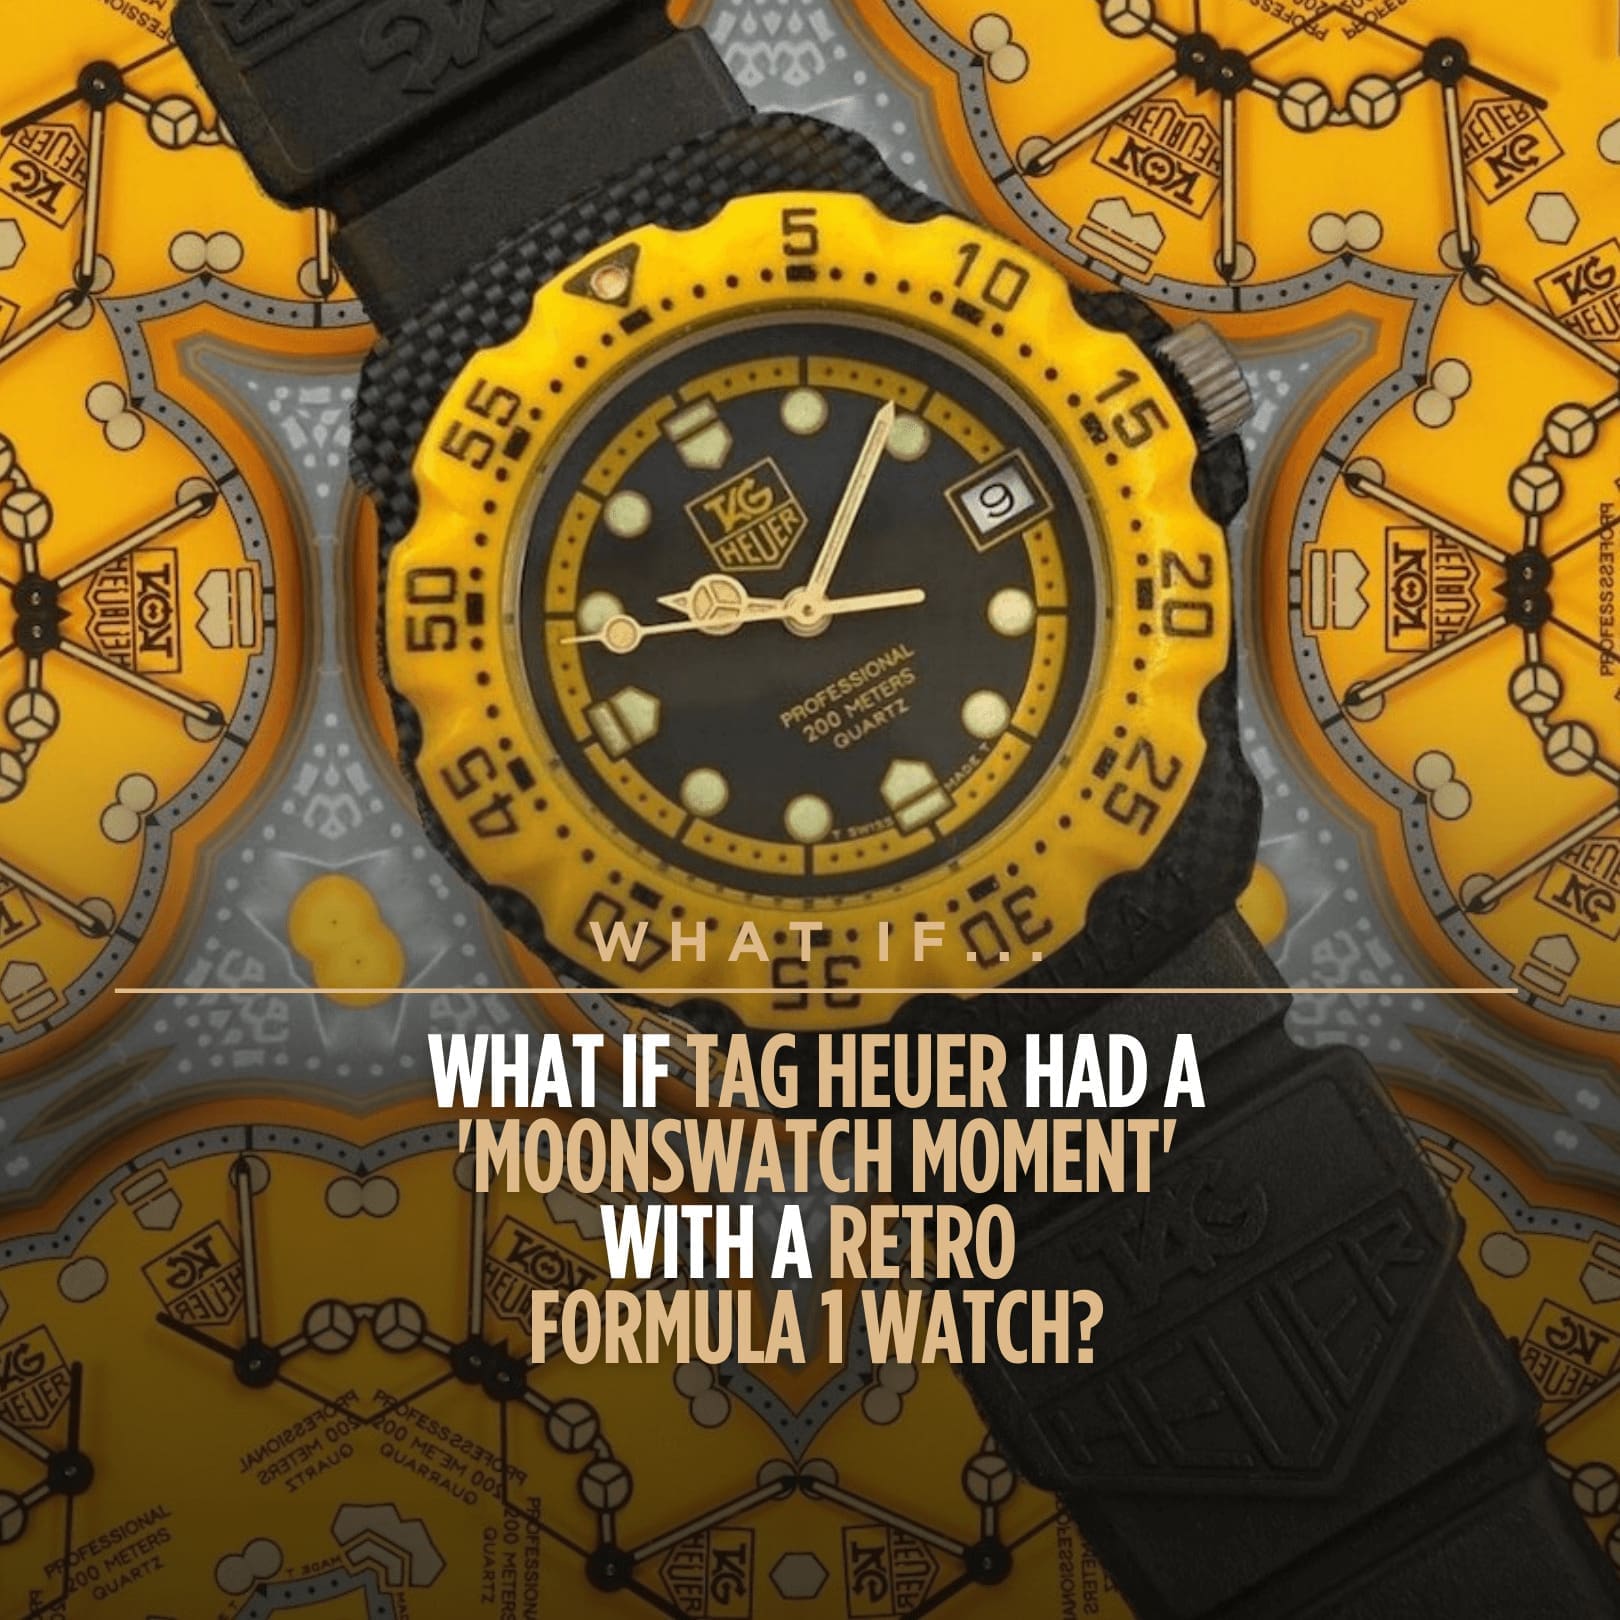 WHAT IF… TAG Heuer created their own MoonSwatch moment with a retro Formula 1?